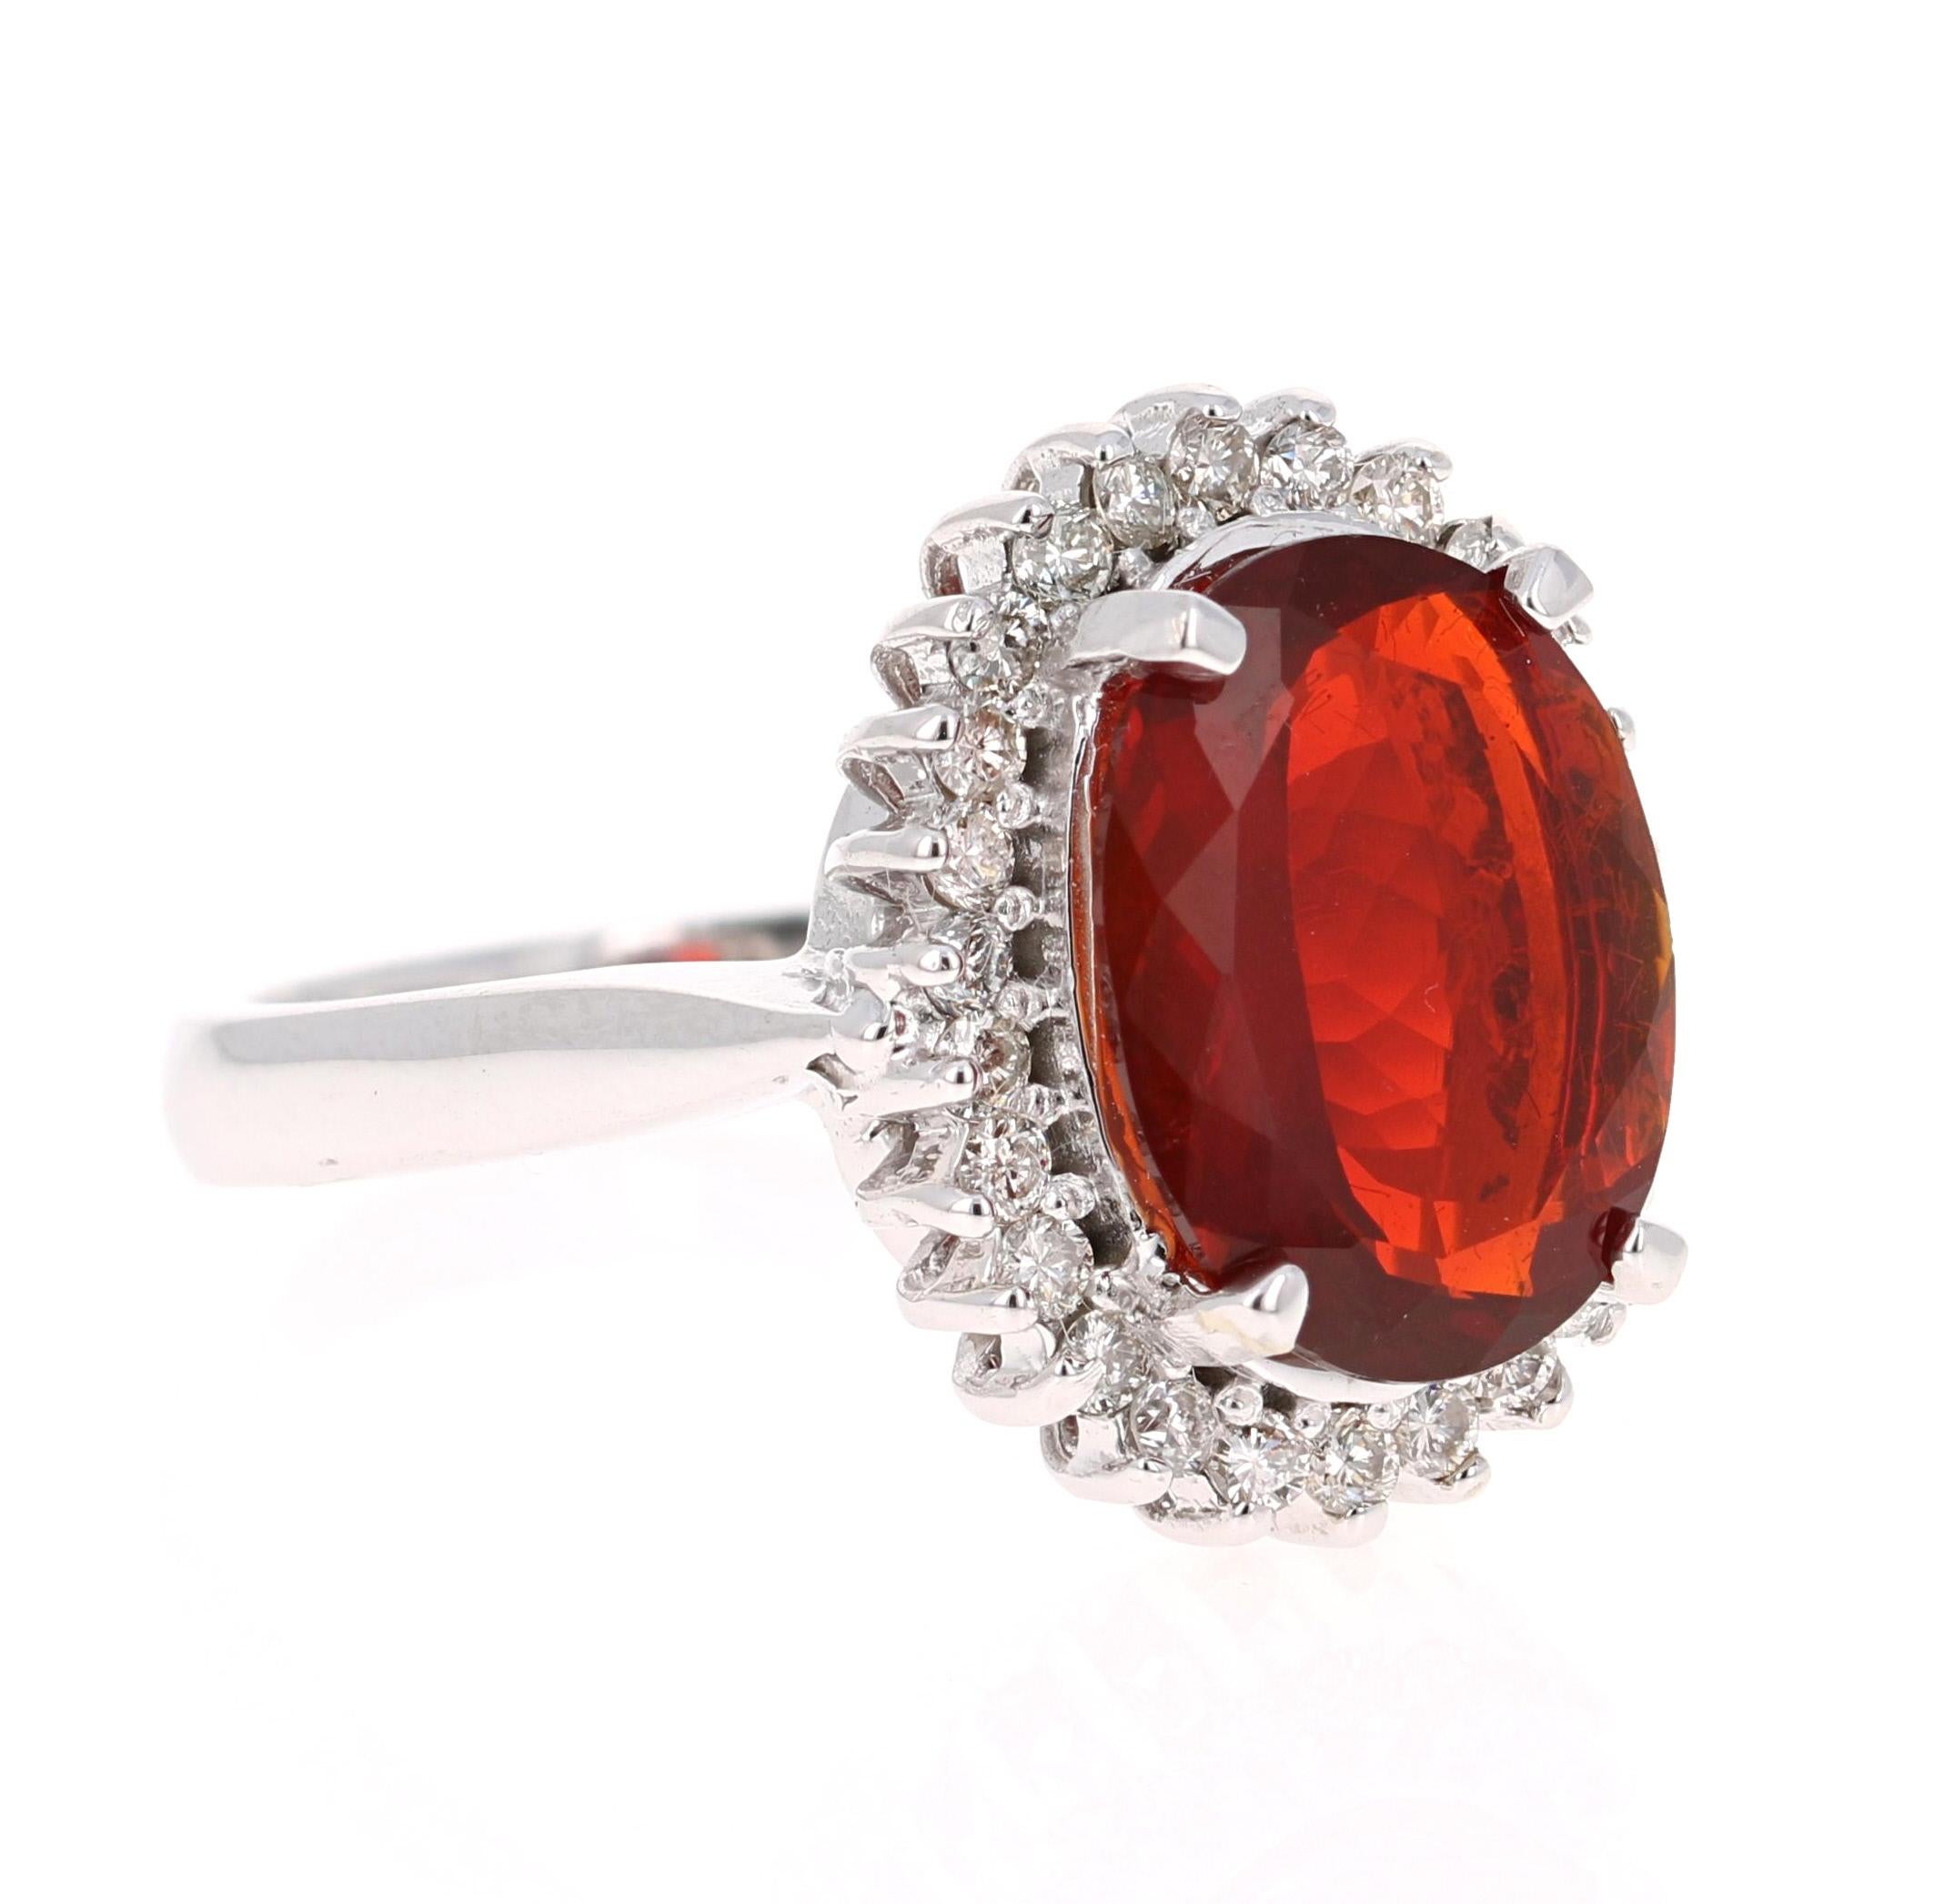 The Fire Opal is 3.35 Carats and is surrounded by 26 Round Cut Diamonds that weigh 0.59 Carats. (Clarity: VS, Color: H)

It is set in 14K White Gold and is approximately 7.7 grams. 

The ring size is 7 3/4 and can be re-sized at no additional